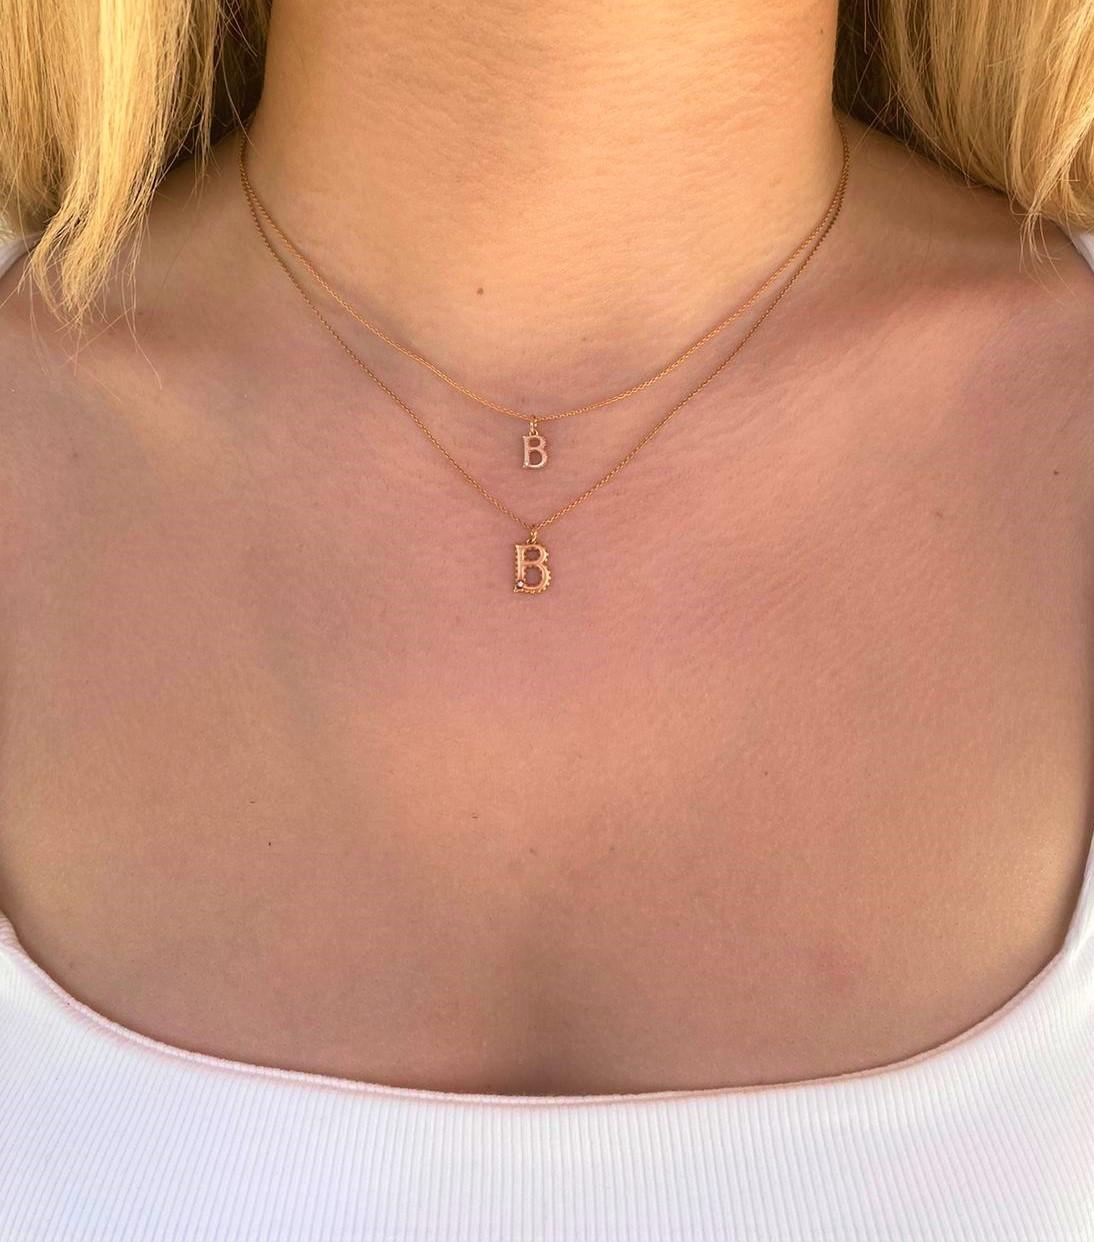 A small necklace in 14k rose gold with 0.01ct white diamond by selda jewellery

Additional Information:-
Collection: Letter collection
14K Rose gold
0.01ct White diamond
Pendant height 0.7cm
Chain length 44cm